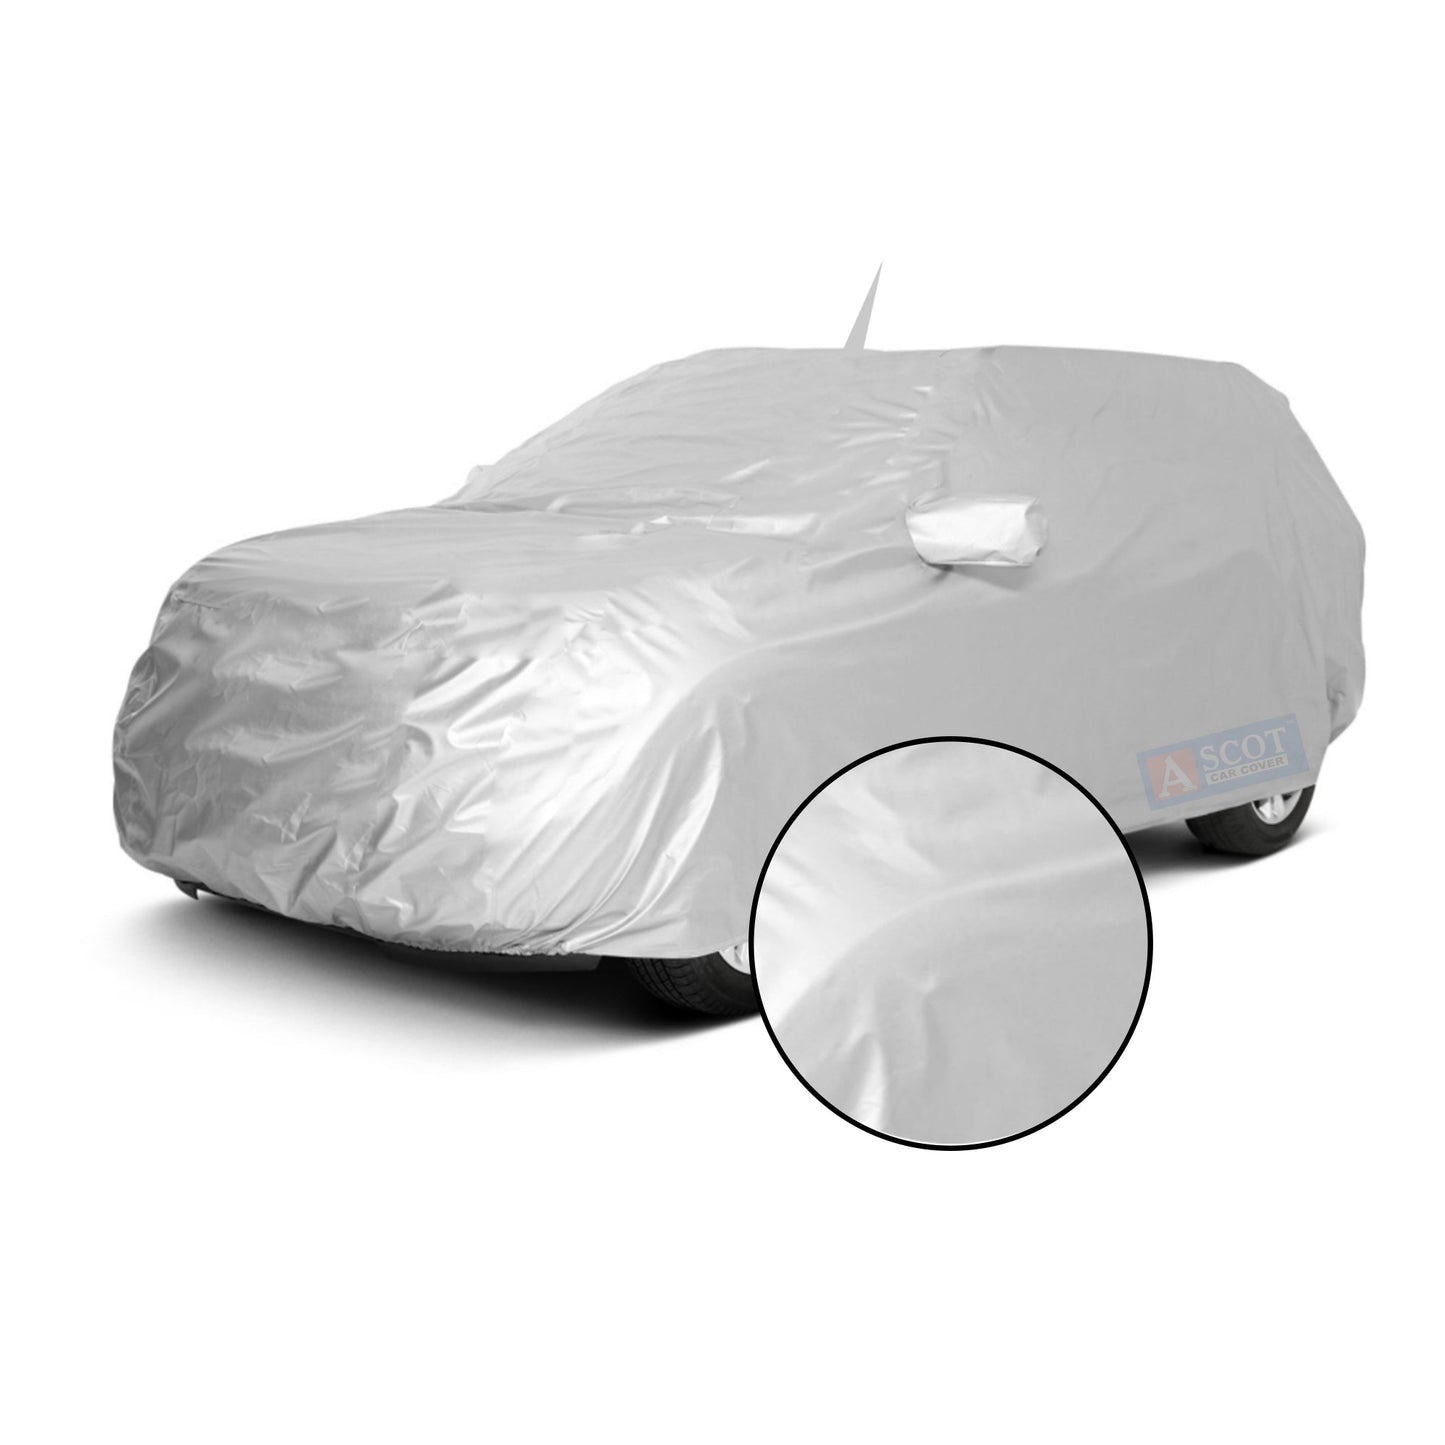 Ascot Volkswagen Tiguan Car Body Cover 2016-2023 Model Dust Proof, Trippel Stitched